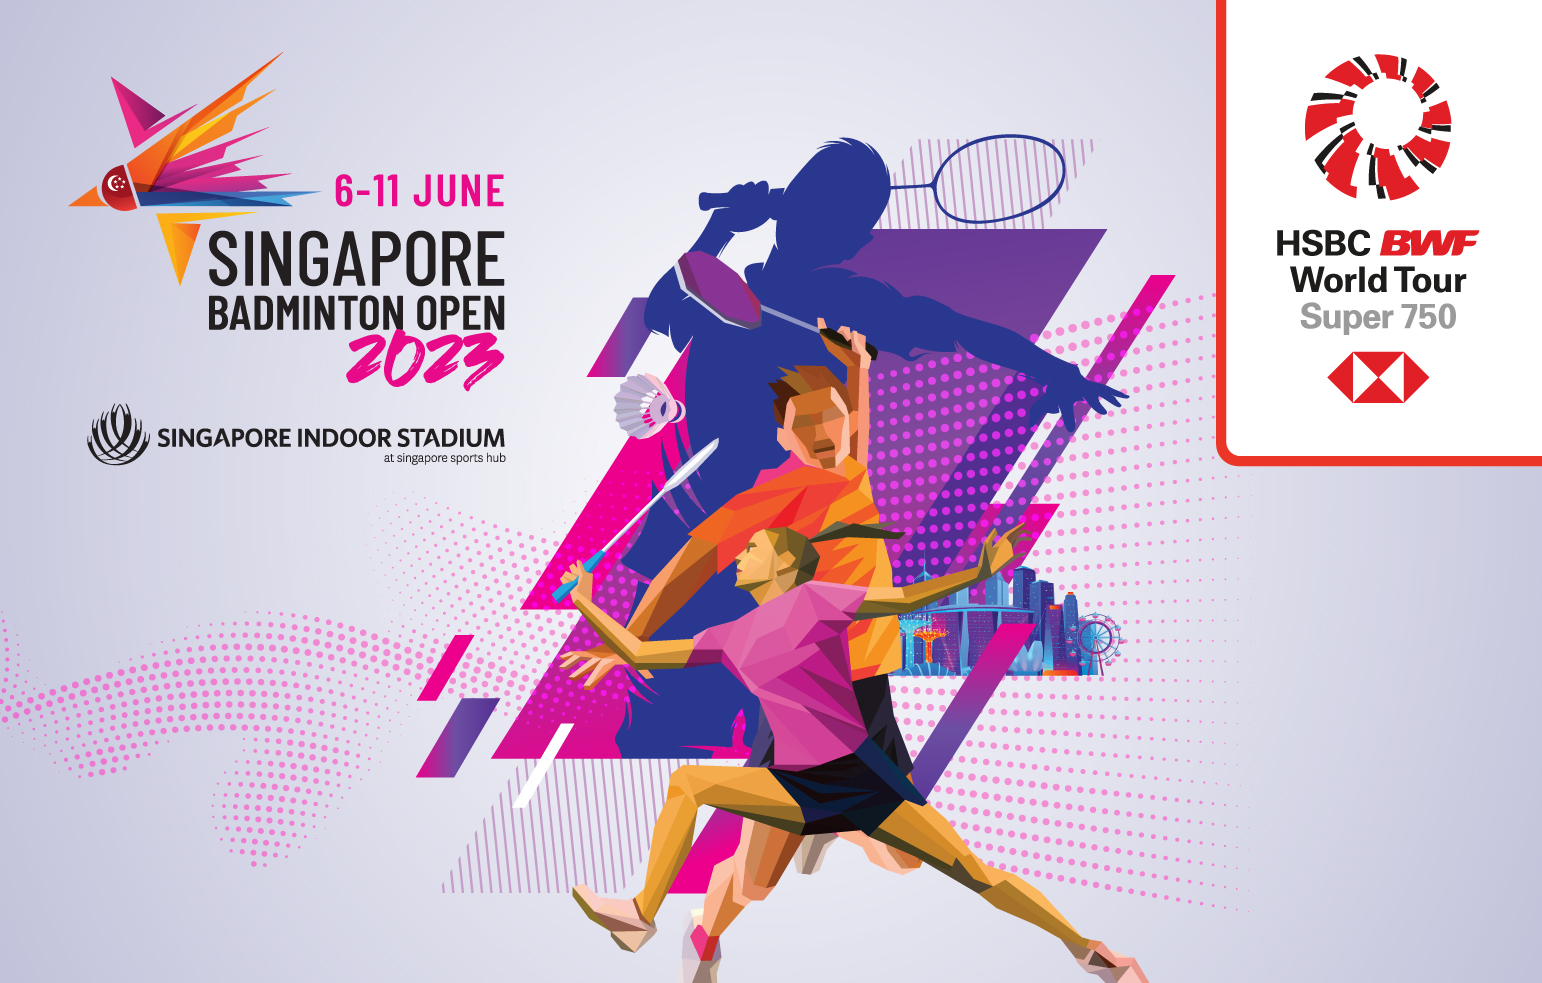 Worlds Best Shuttlers To Compete at Singapore Badminton Open in June!